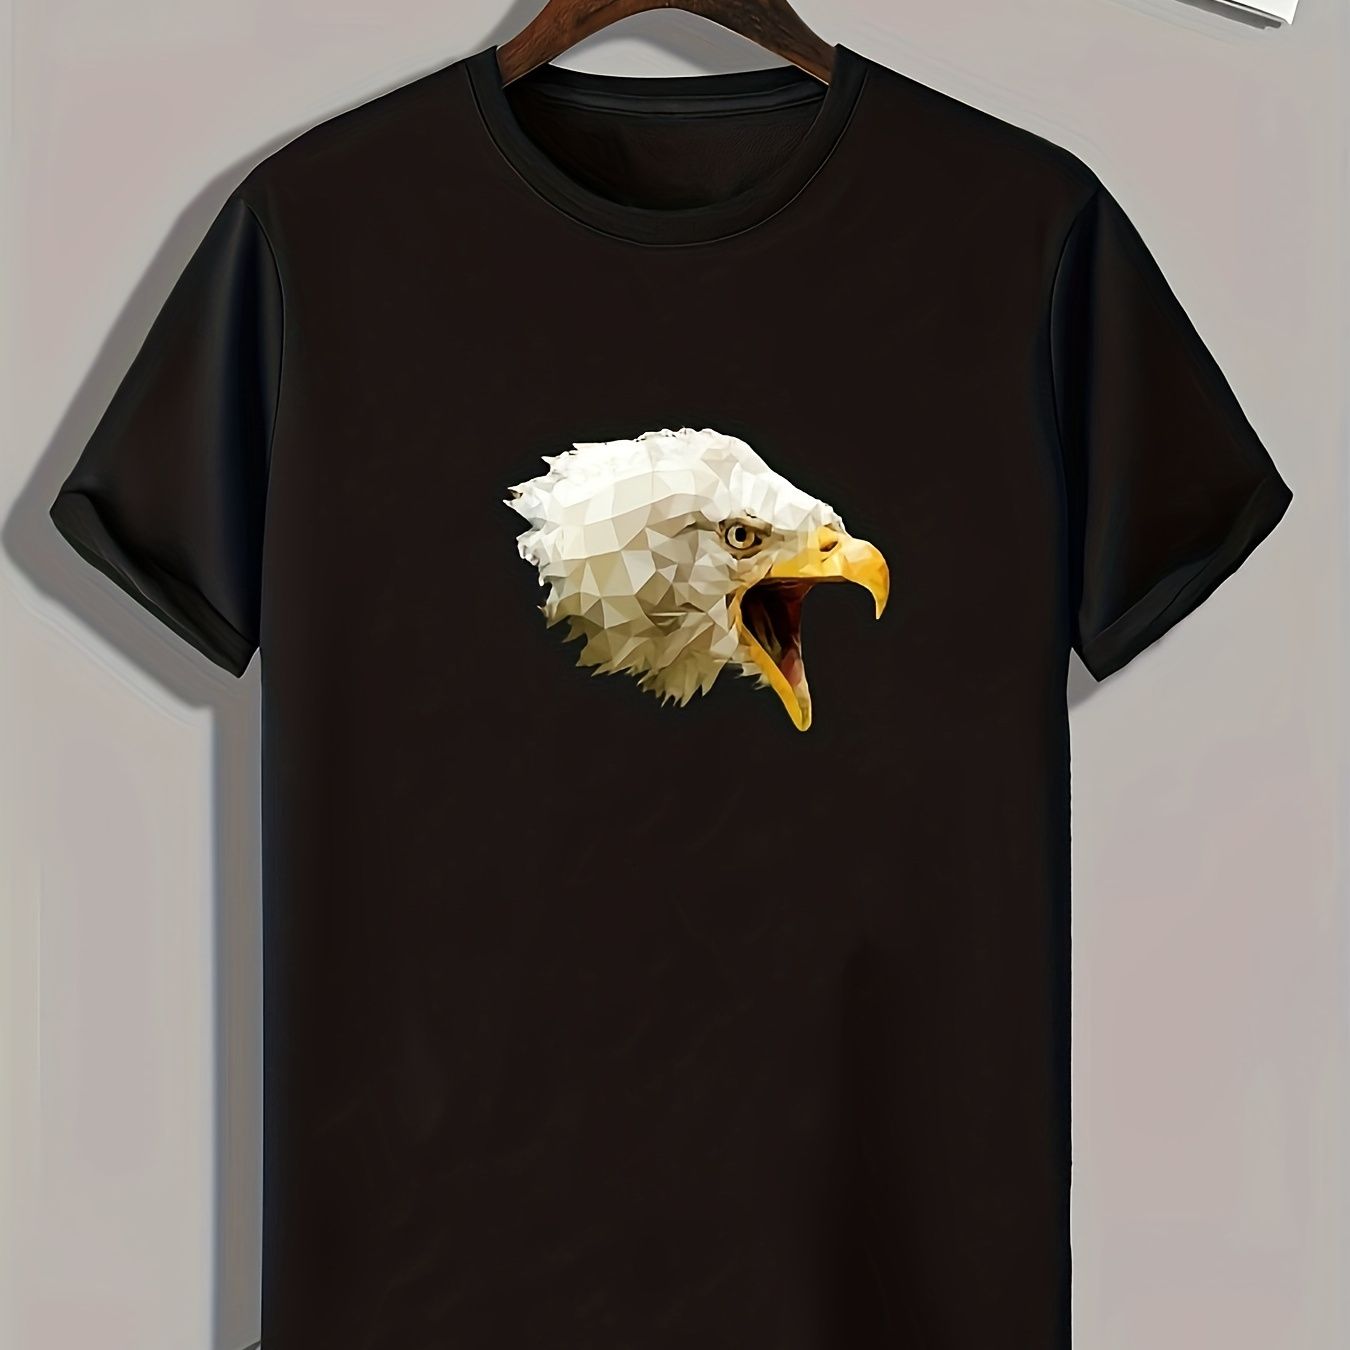 

Eagle Head Print, Men's Trendy Comfy T-shirt, Active Slightly Stretch Breathable Tee For Outdoor Summer